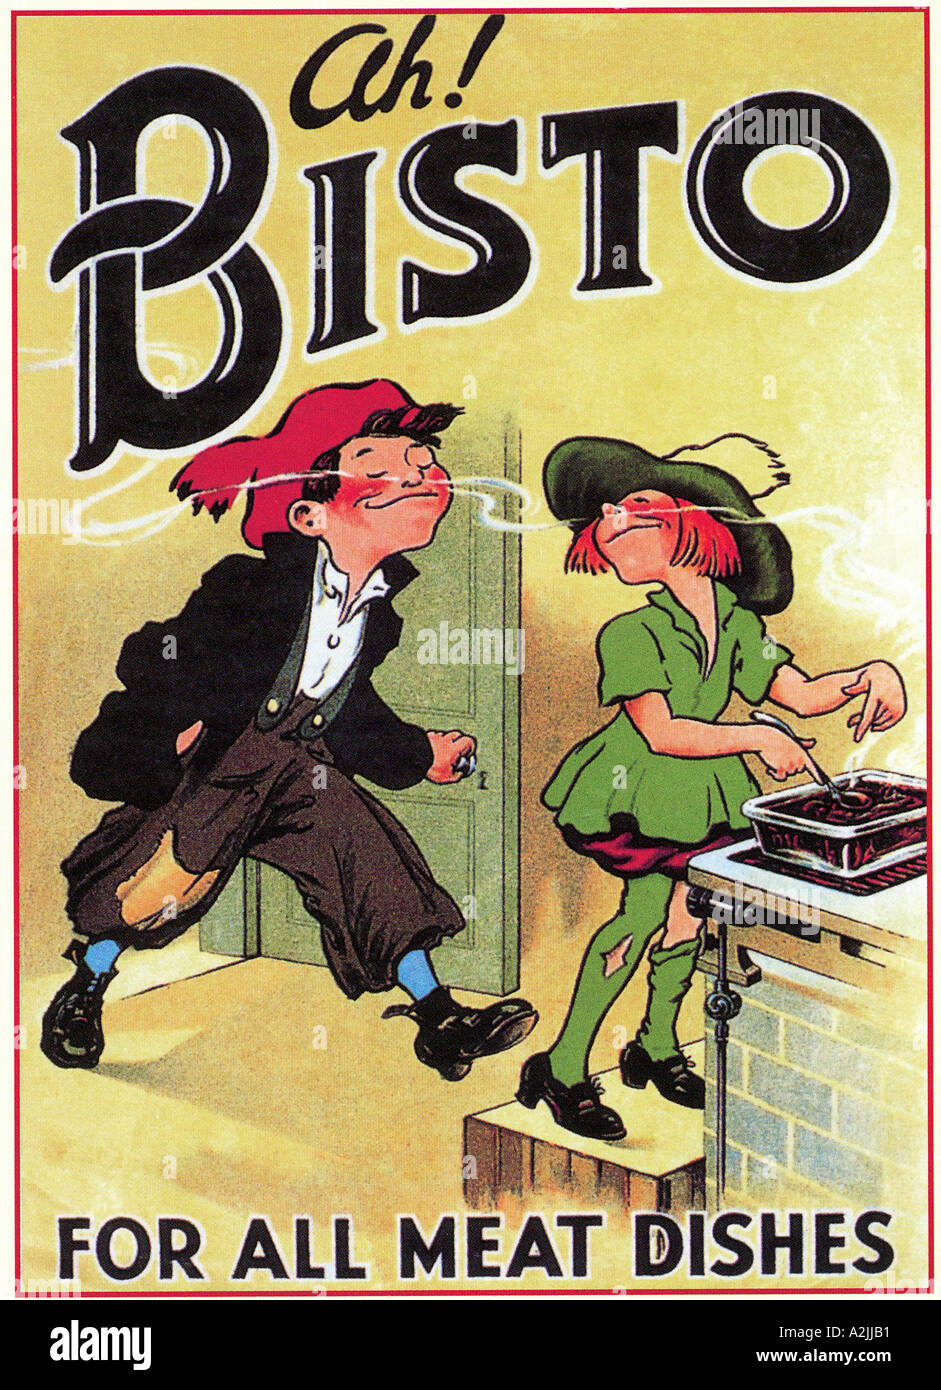 Bisto advert circa 1930 featuring the Bisto Twins one of the most famous of all British food brands Stock Photo